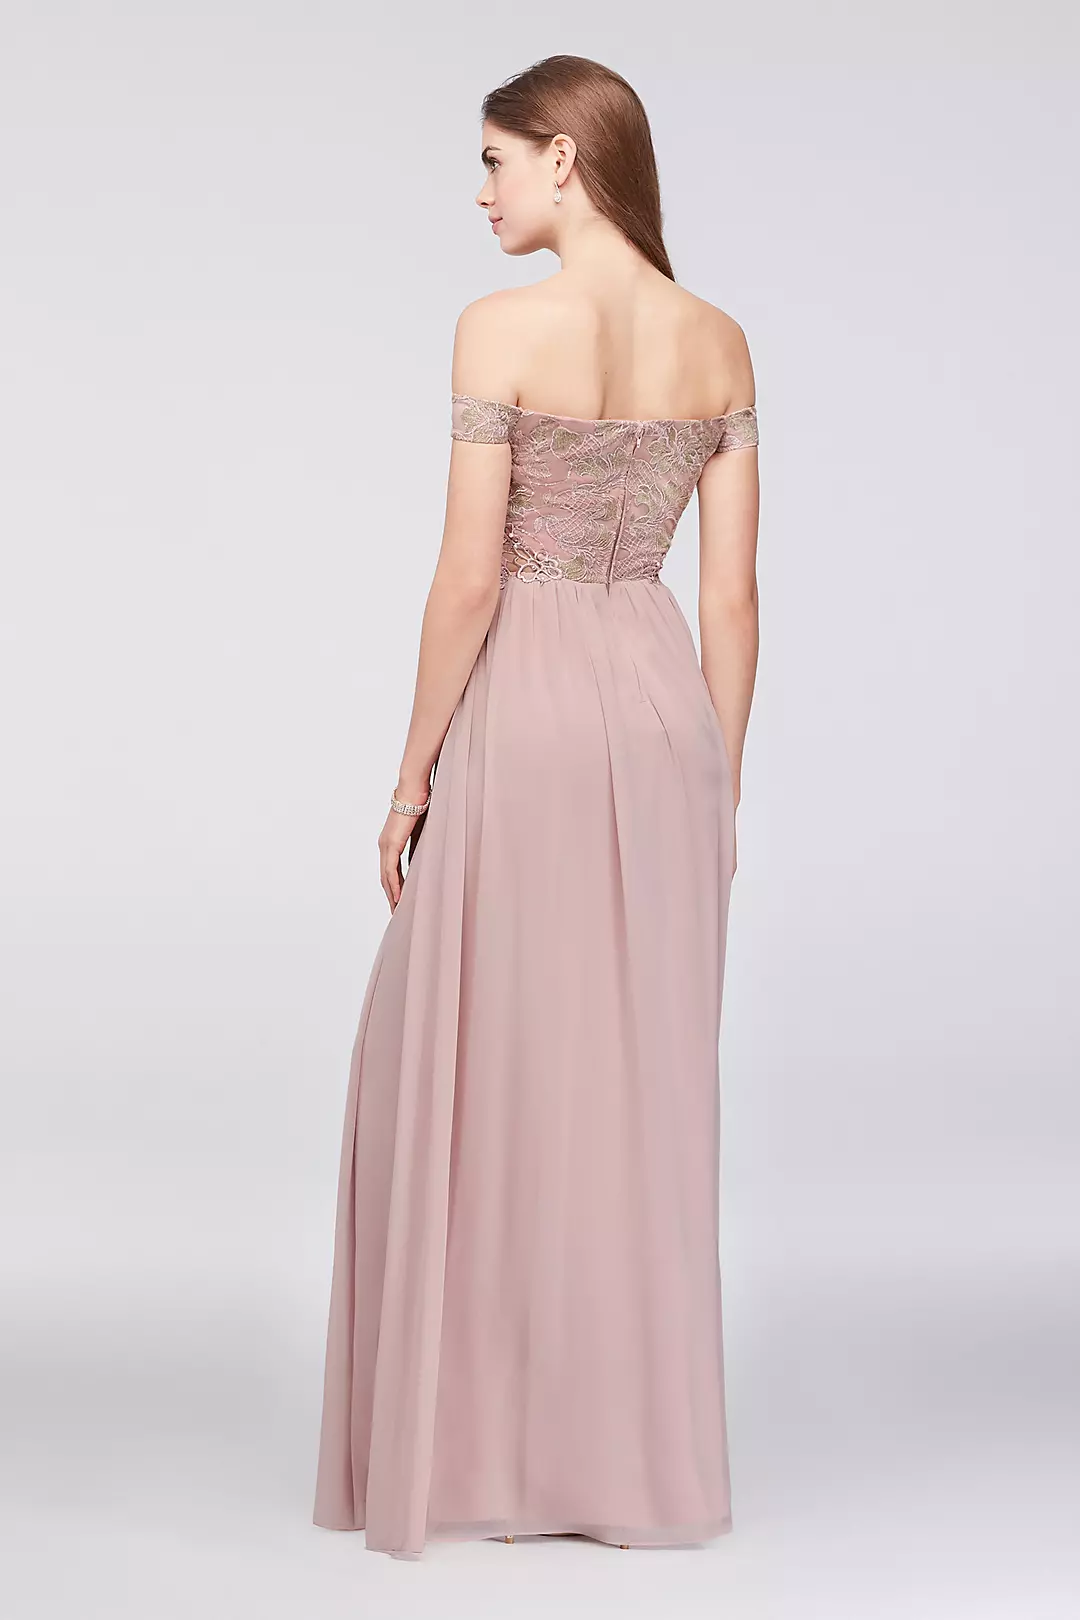 Off-the-Shoulder Lace and Chiffon Corset Gown Image 2